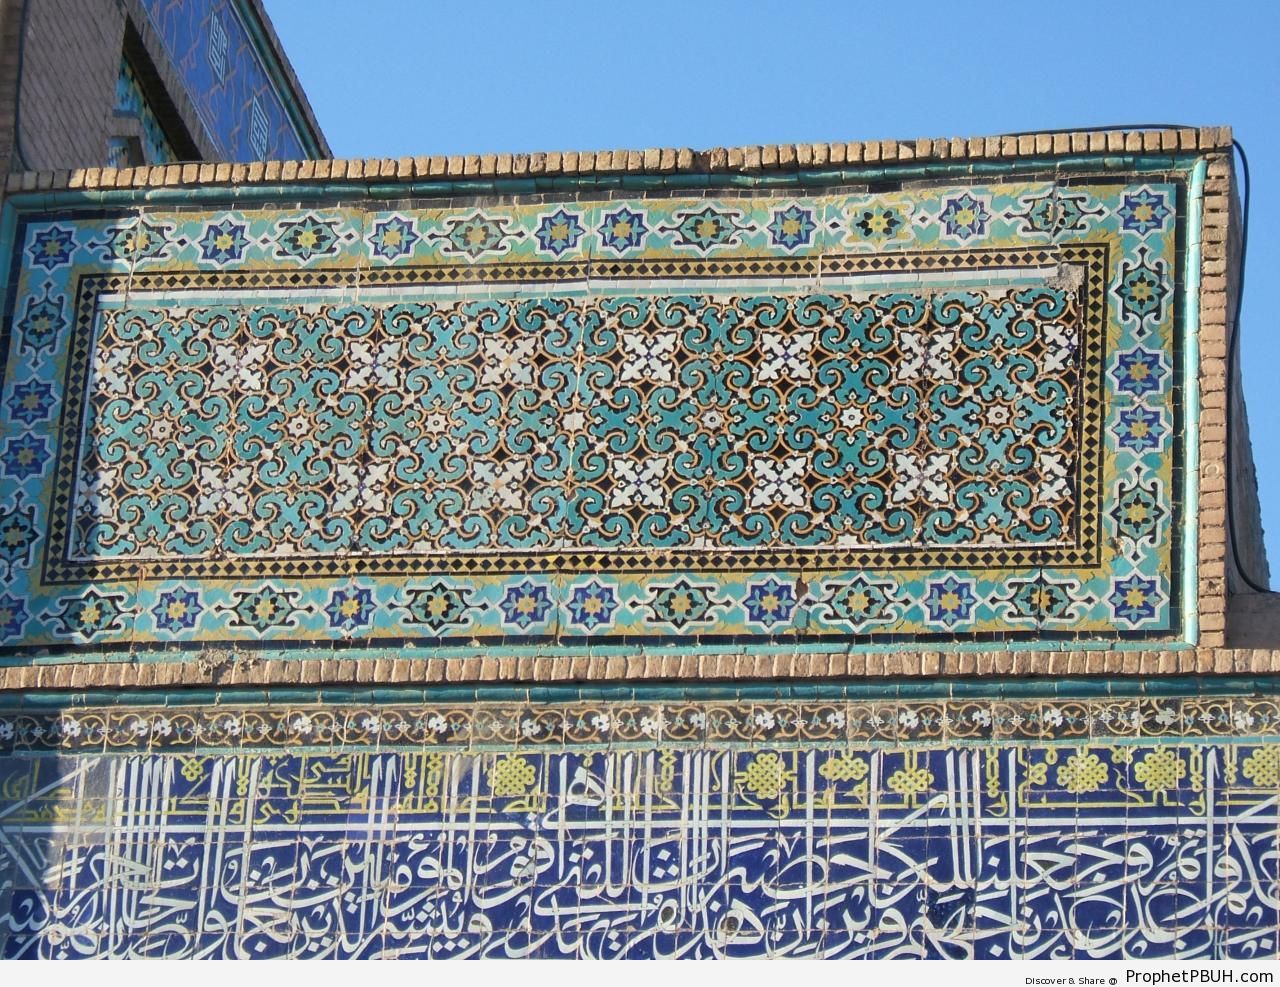 Tilework and Calligraphy at the Herat Friday Mosque in Afghanistan - Afghanistan Islamic Architecture 